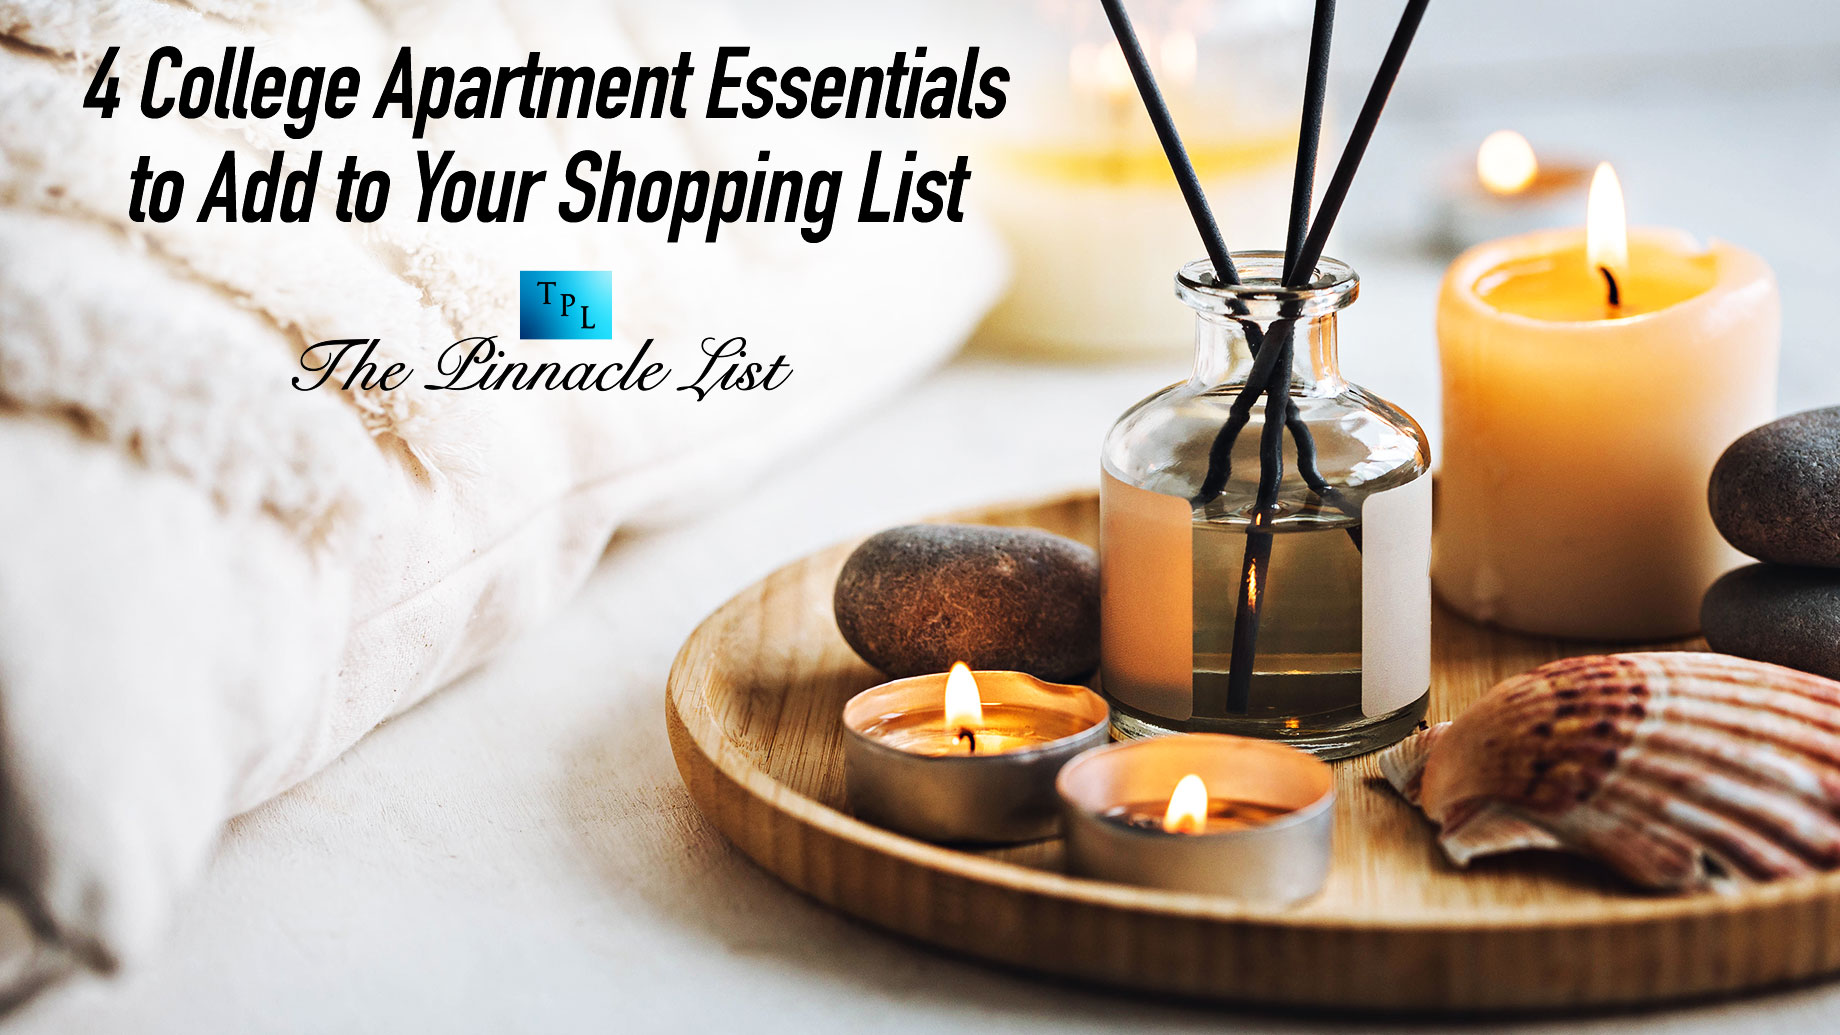 4 College Apartment Essentials to Add to Your Shopping List